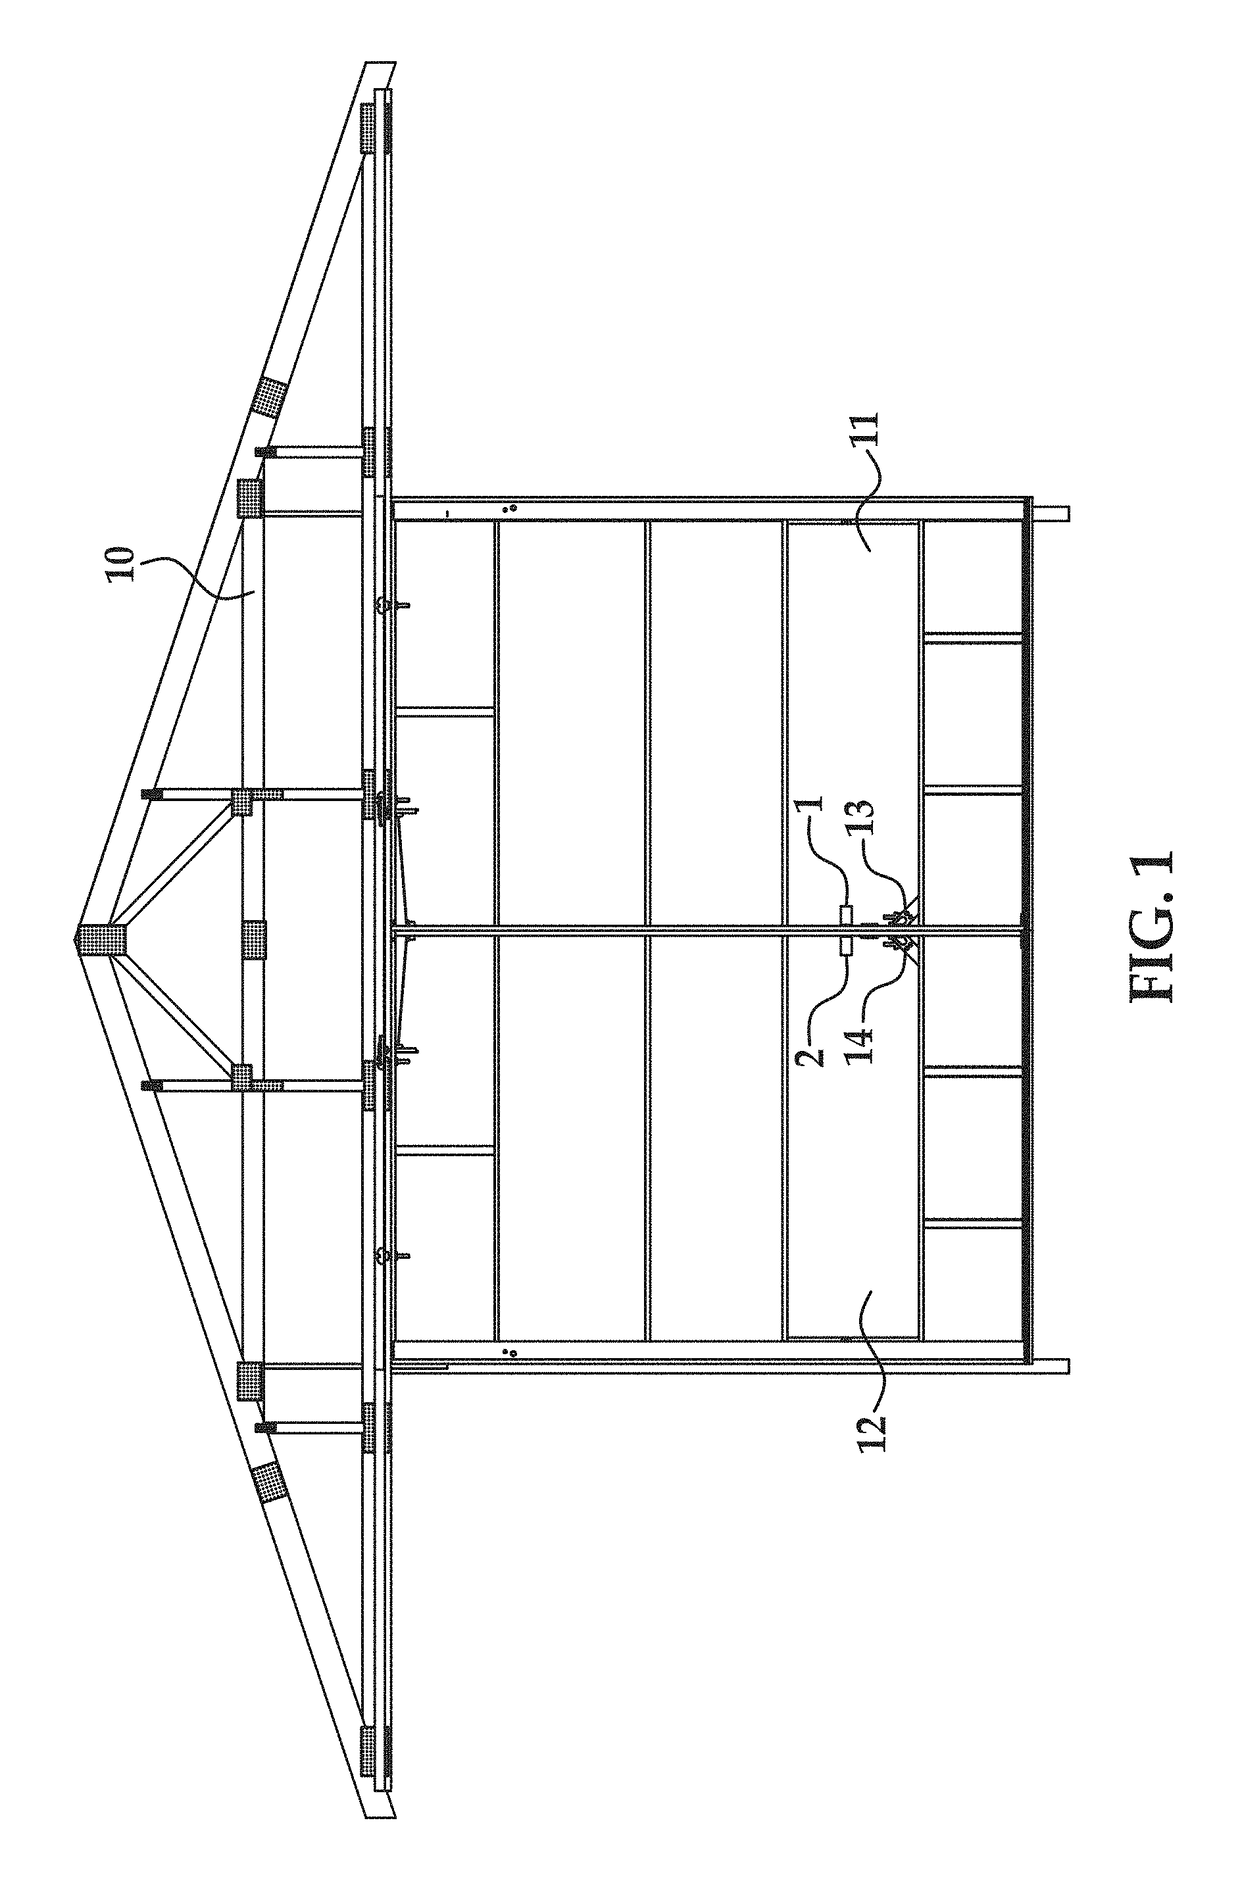 Self-latching and self-locking latch system for sliding door panels